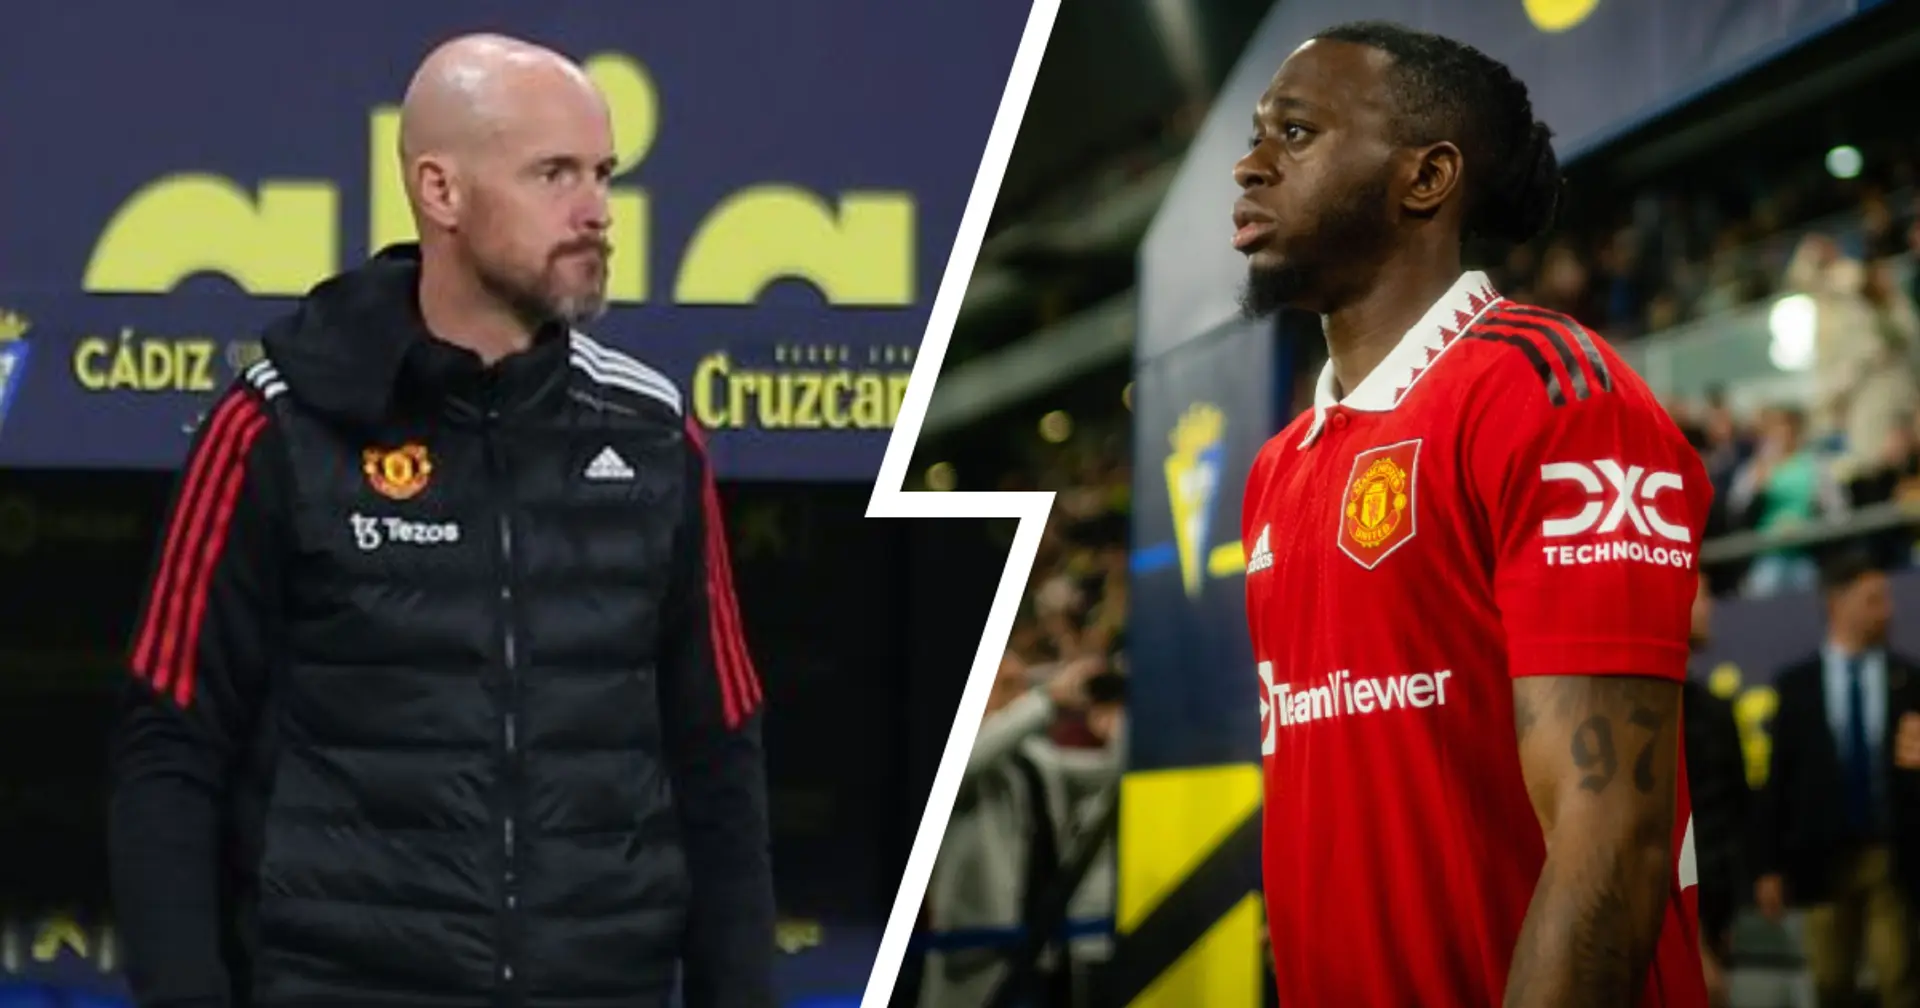 'Needs to be sold in January': Man United fans react to Aaron Wan-Bissaka's display against Cadiz